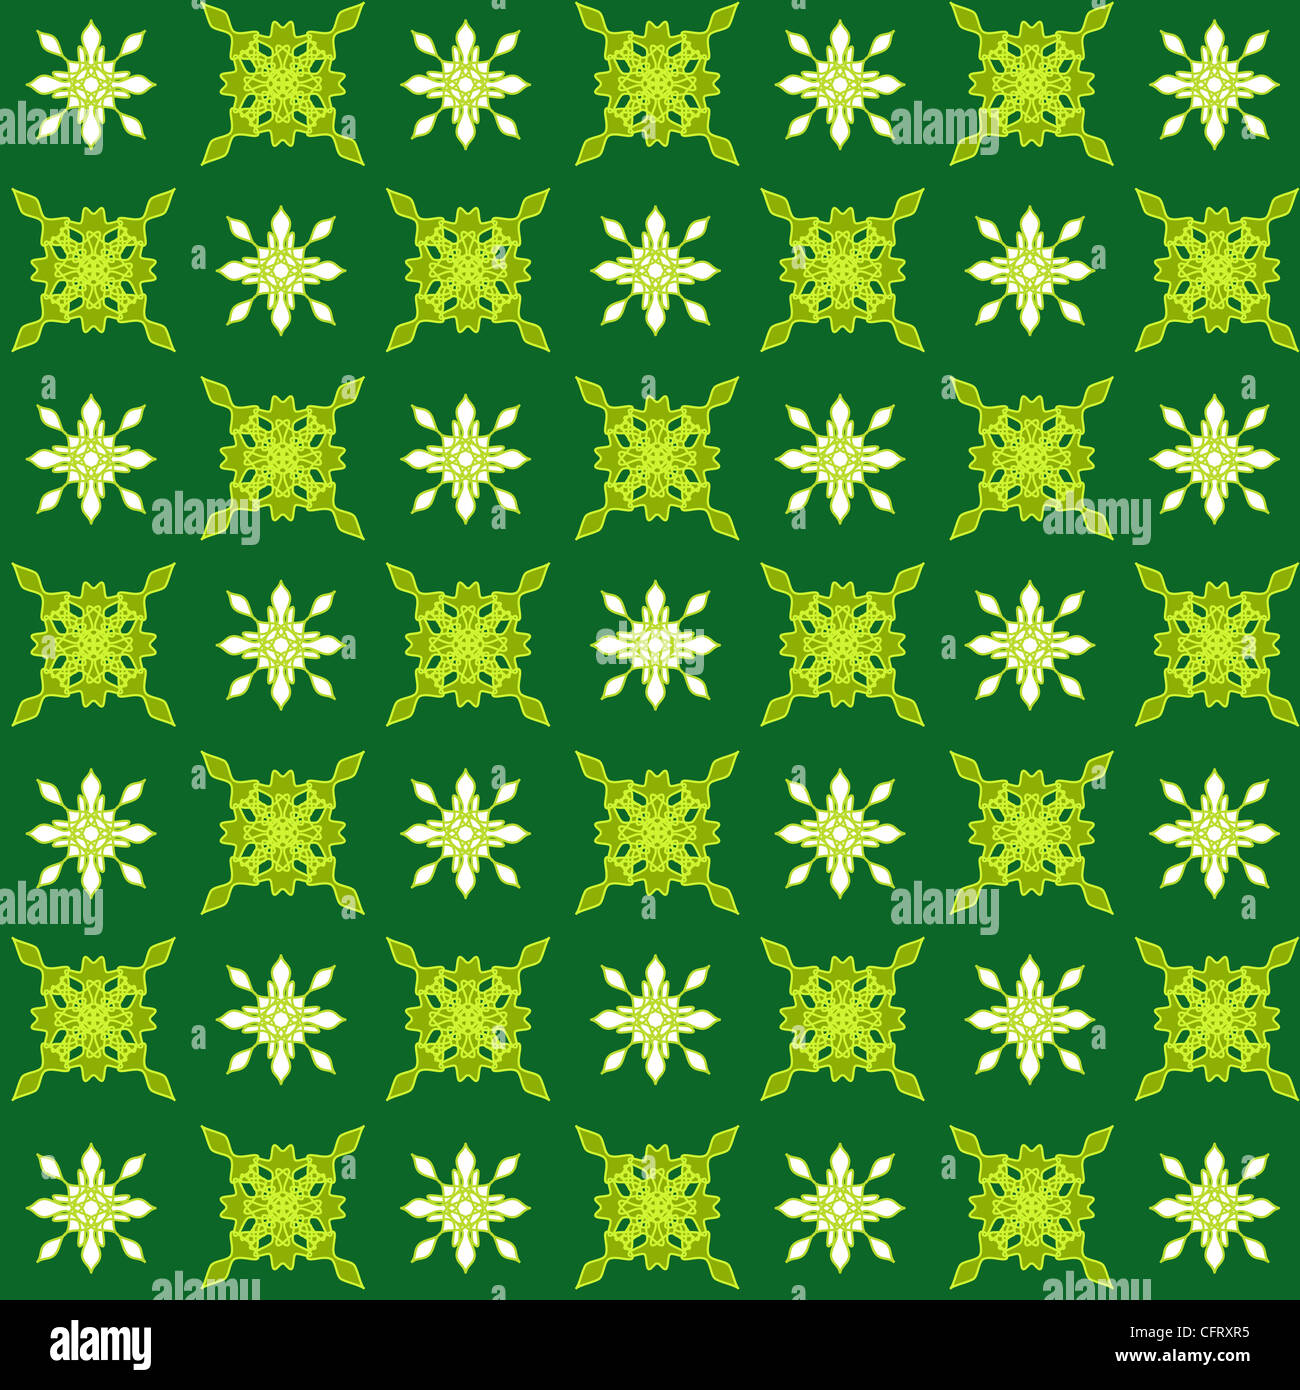 Decorative seamless pattern in green Stock Photo